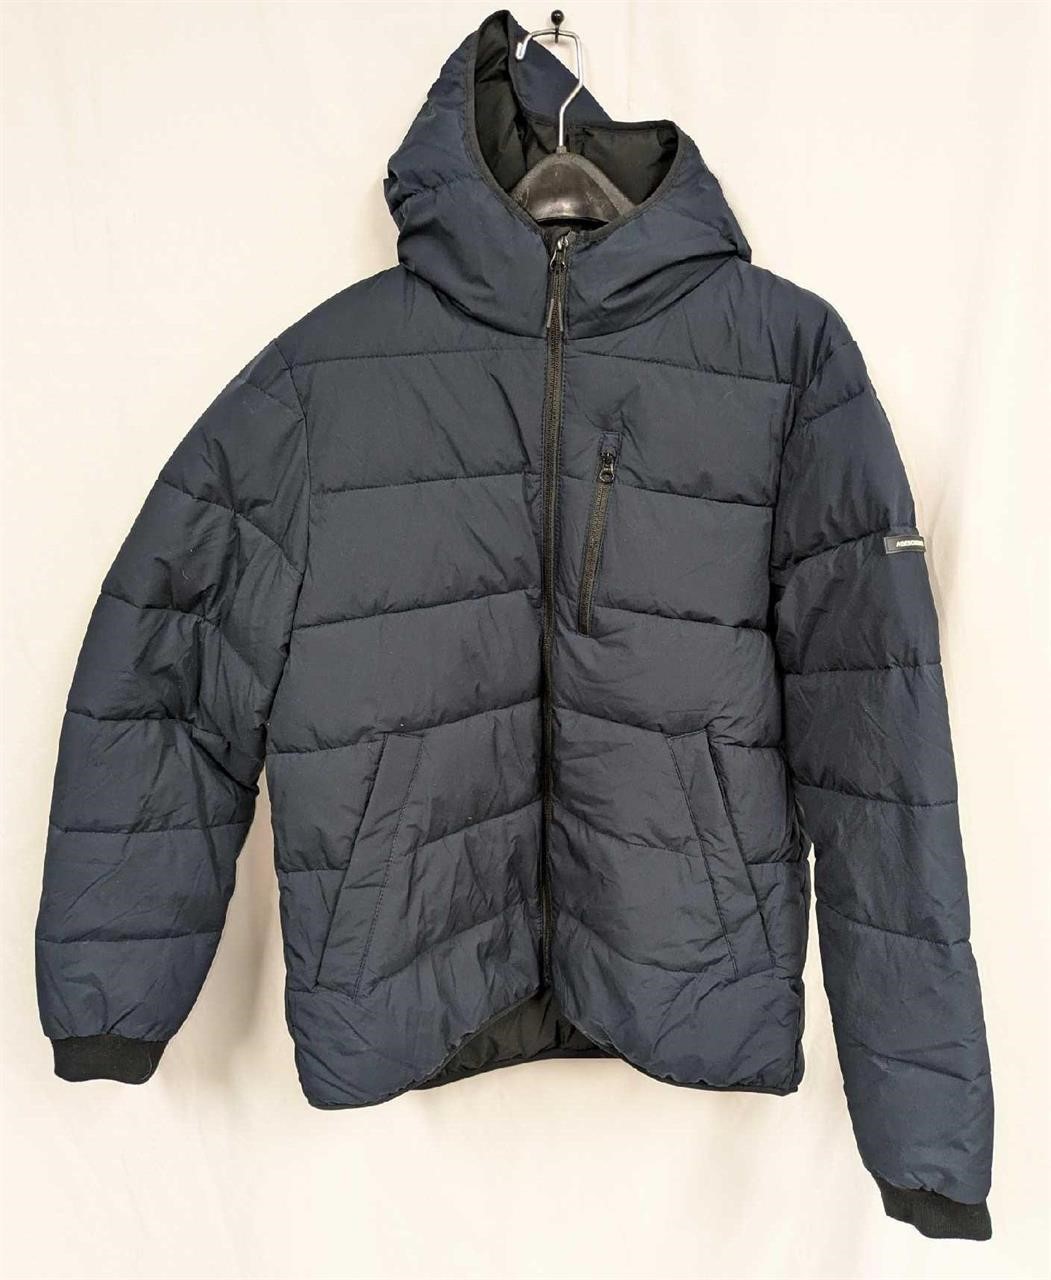 Abercrombie & Fitch Men's Large Stretch Hooded Puf